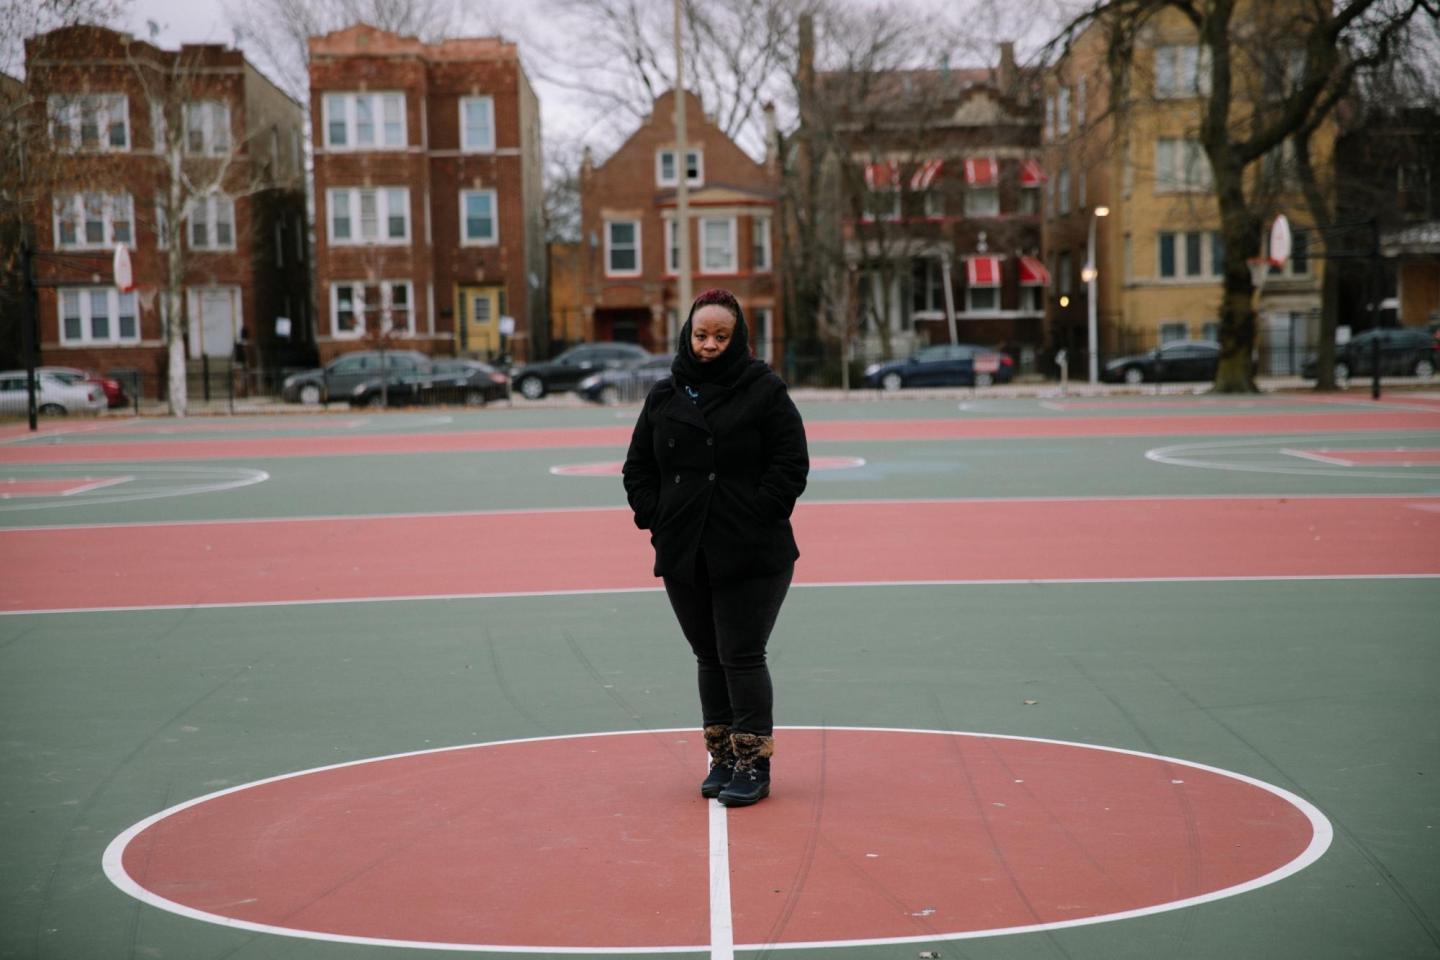 A woman stands in the middle of a basketball court at a city park.